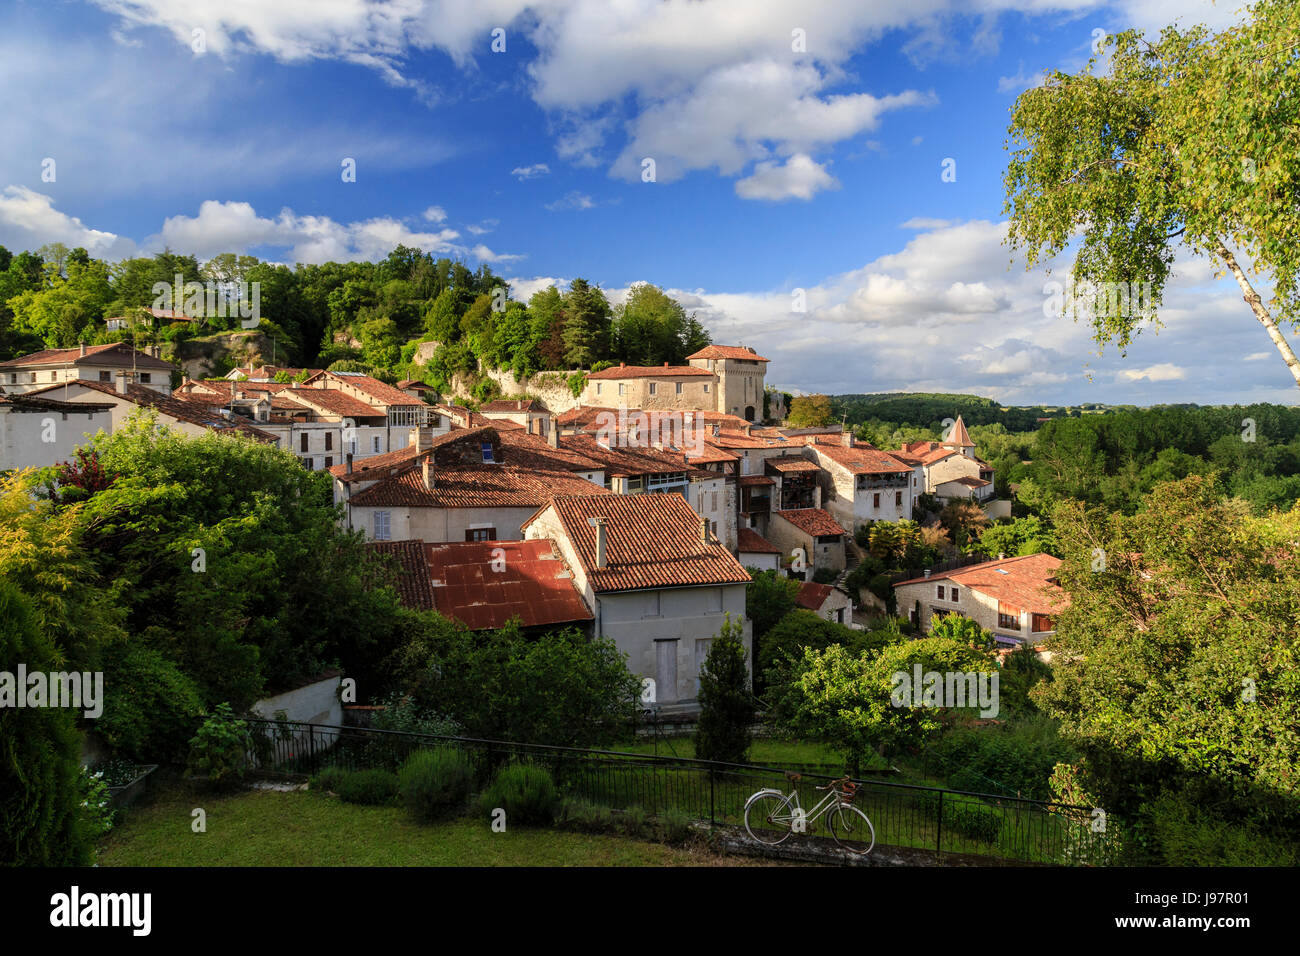 France, Charente, Aubeterre sur Dronne, labelled The Most beautiful Villages of France, the roofs of houses and the castle of the village Stock Photo